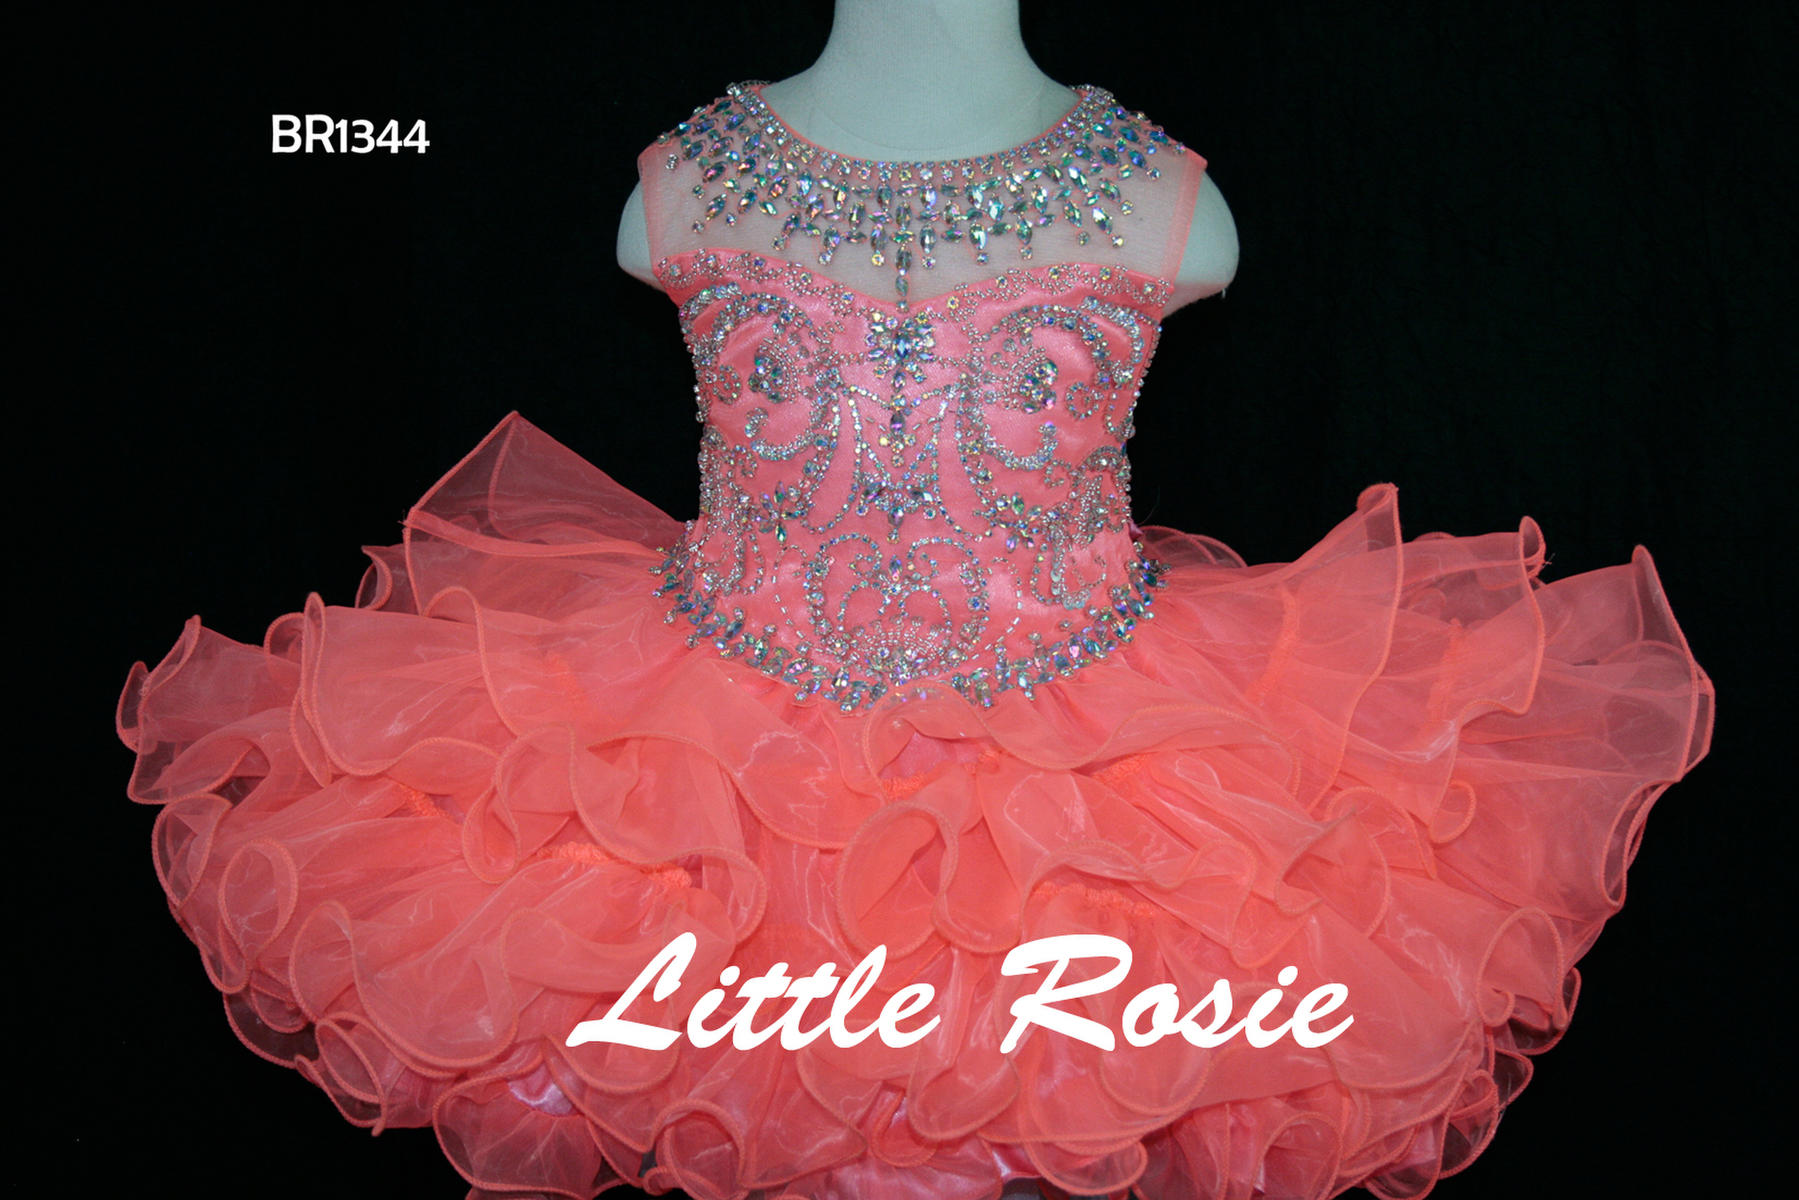 pageant dresses for little girls